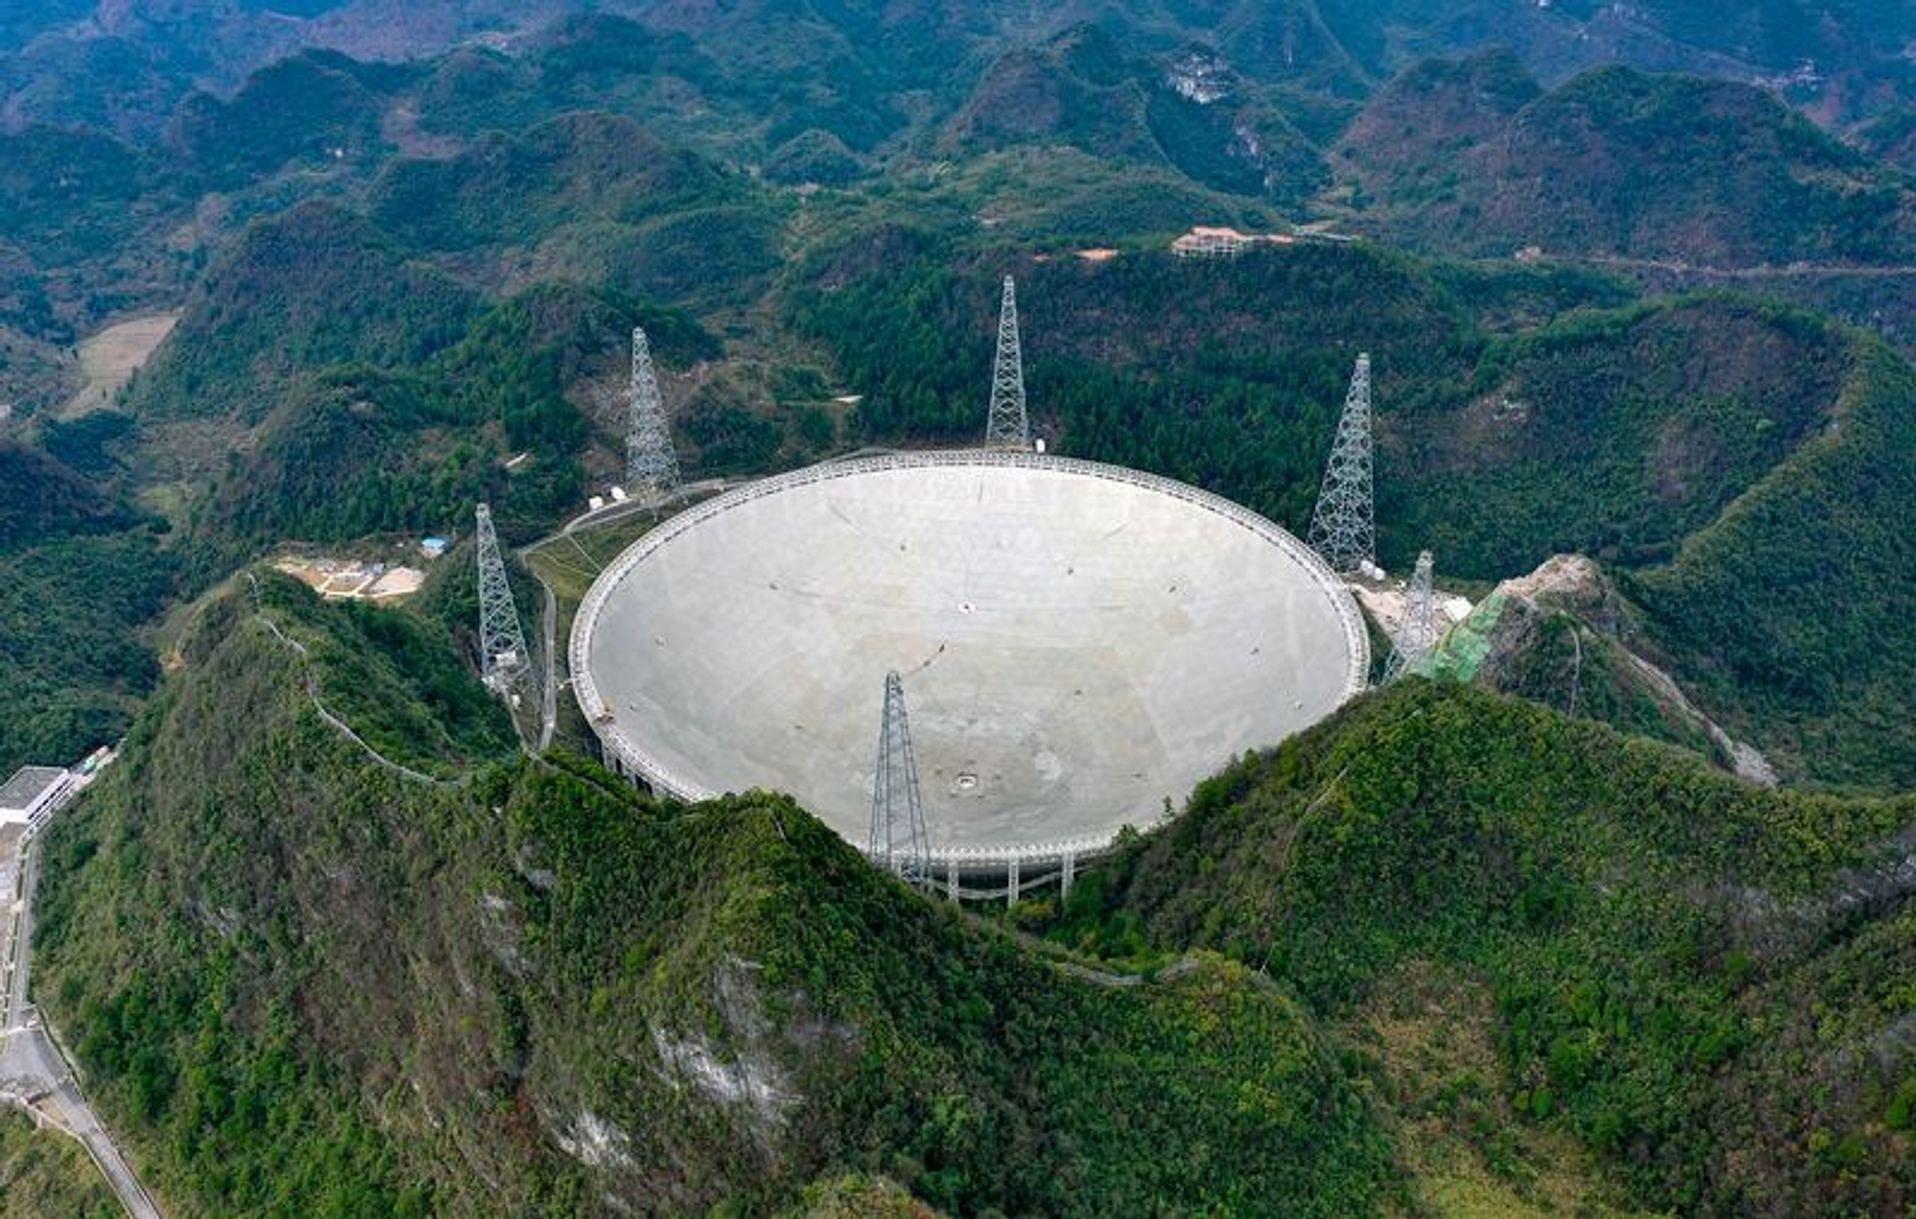 The Chinese telescope, FAST, claimed to have detected signals from Aliens (Image via Qu Honglun/Getty Images)